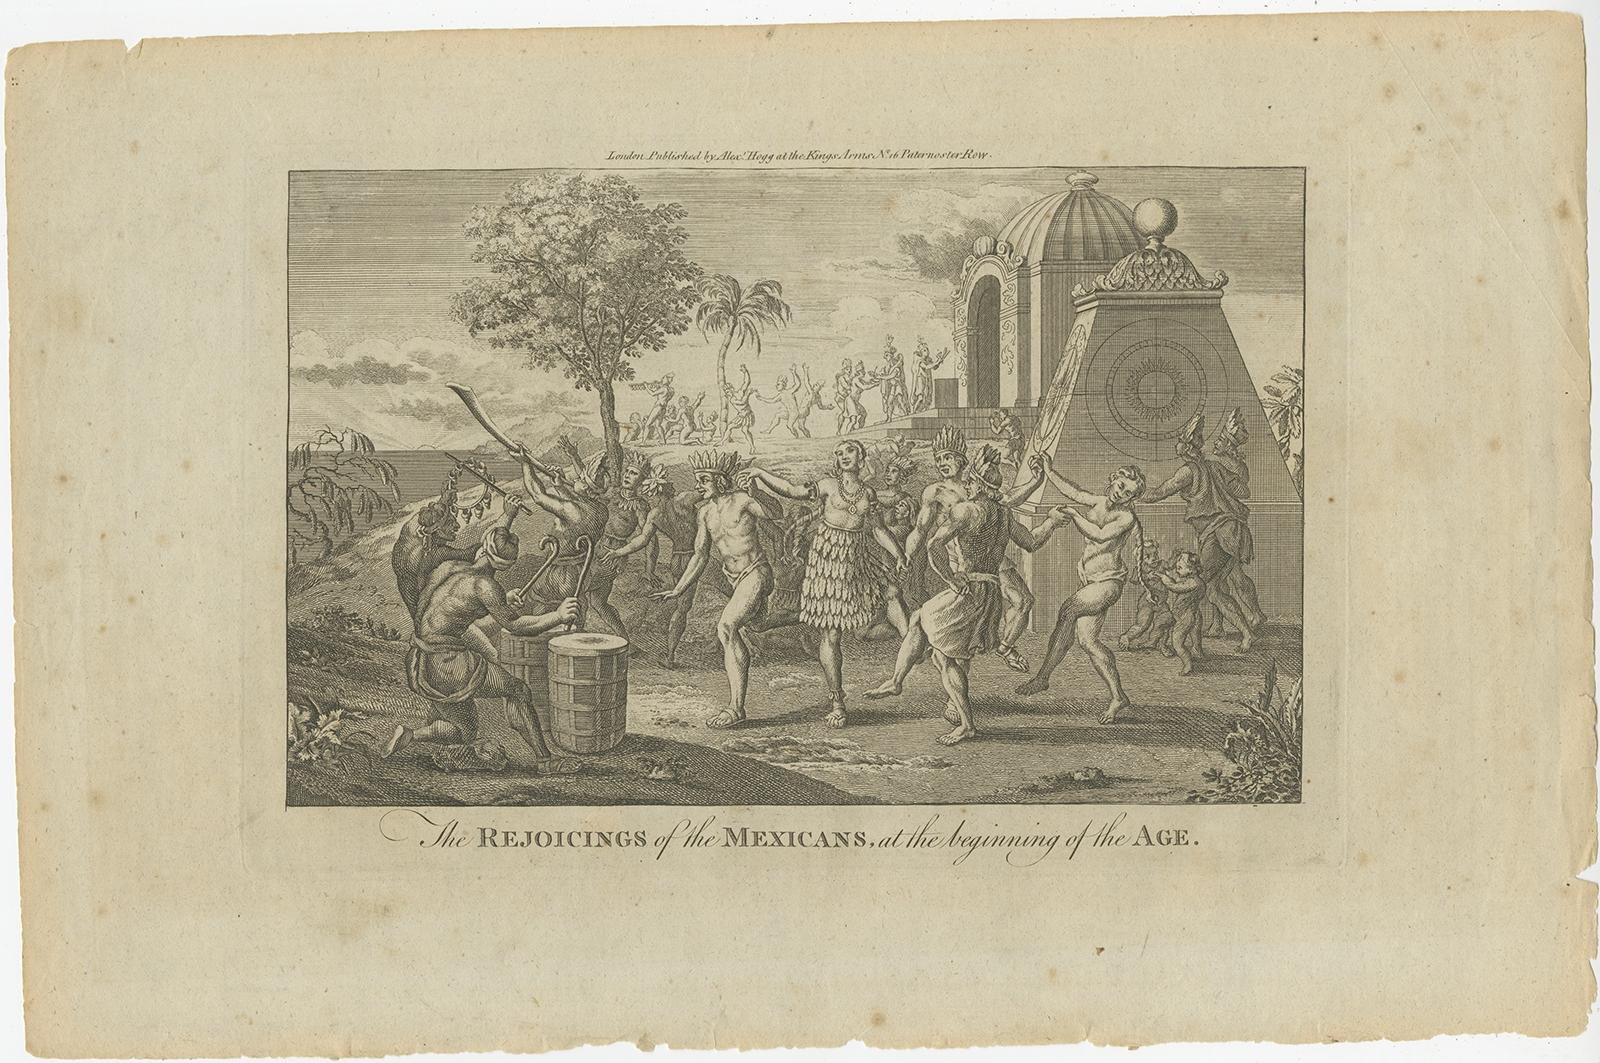 Description: Antique print titled 'The Rejoicings of the Mexicans, at the beginning of the Age'. 

Copper engraving showing the celebrations of the Mexicans with music and natives dancing. This print originates from 'New Complete Collection of